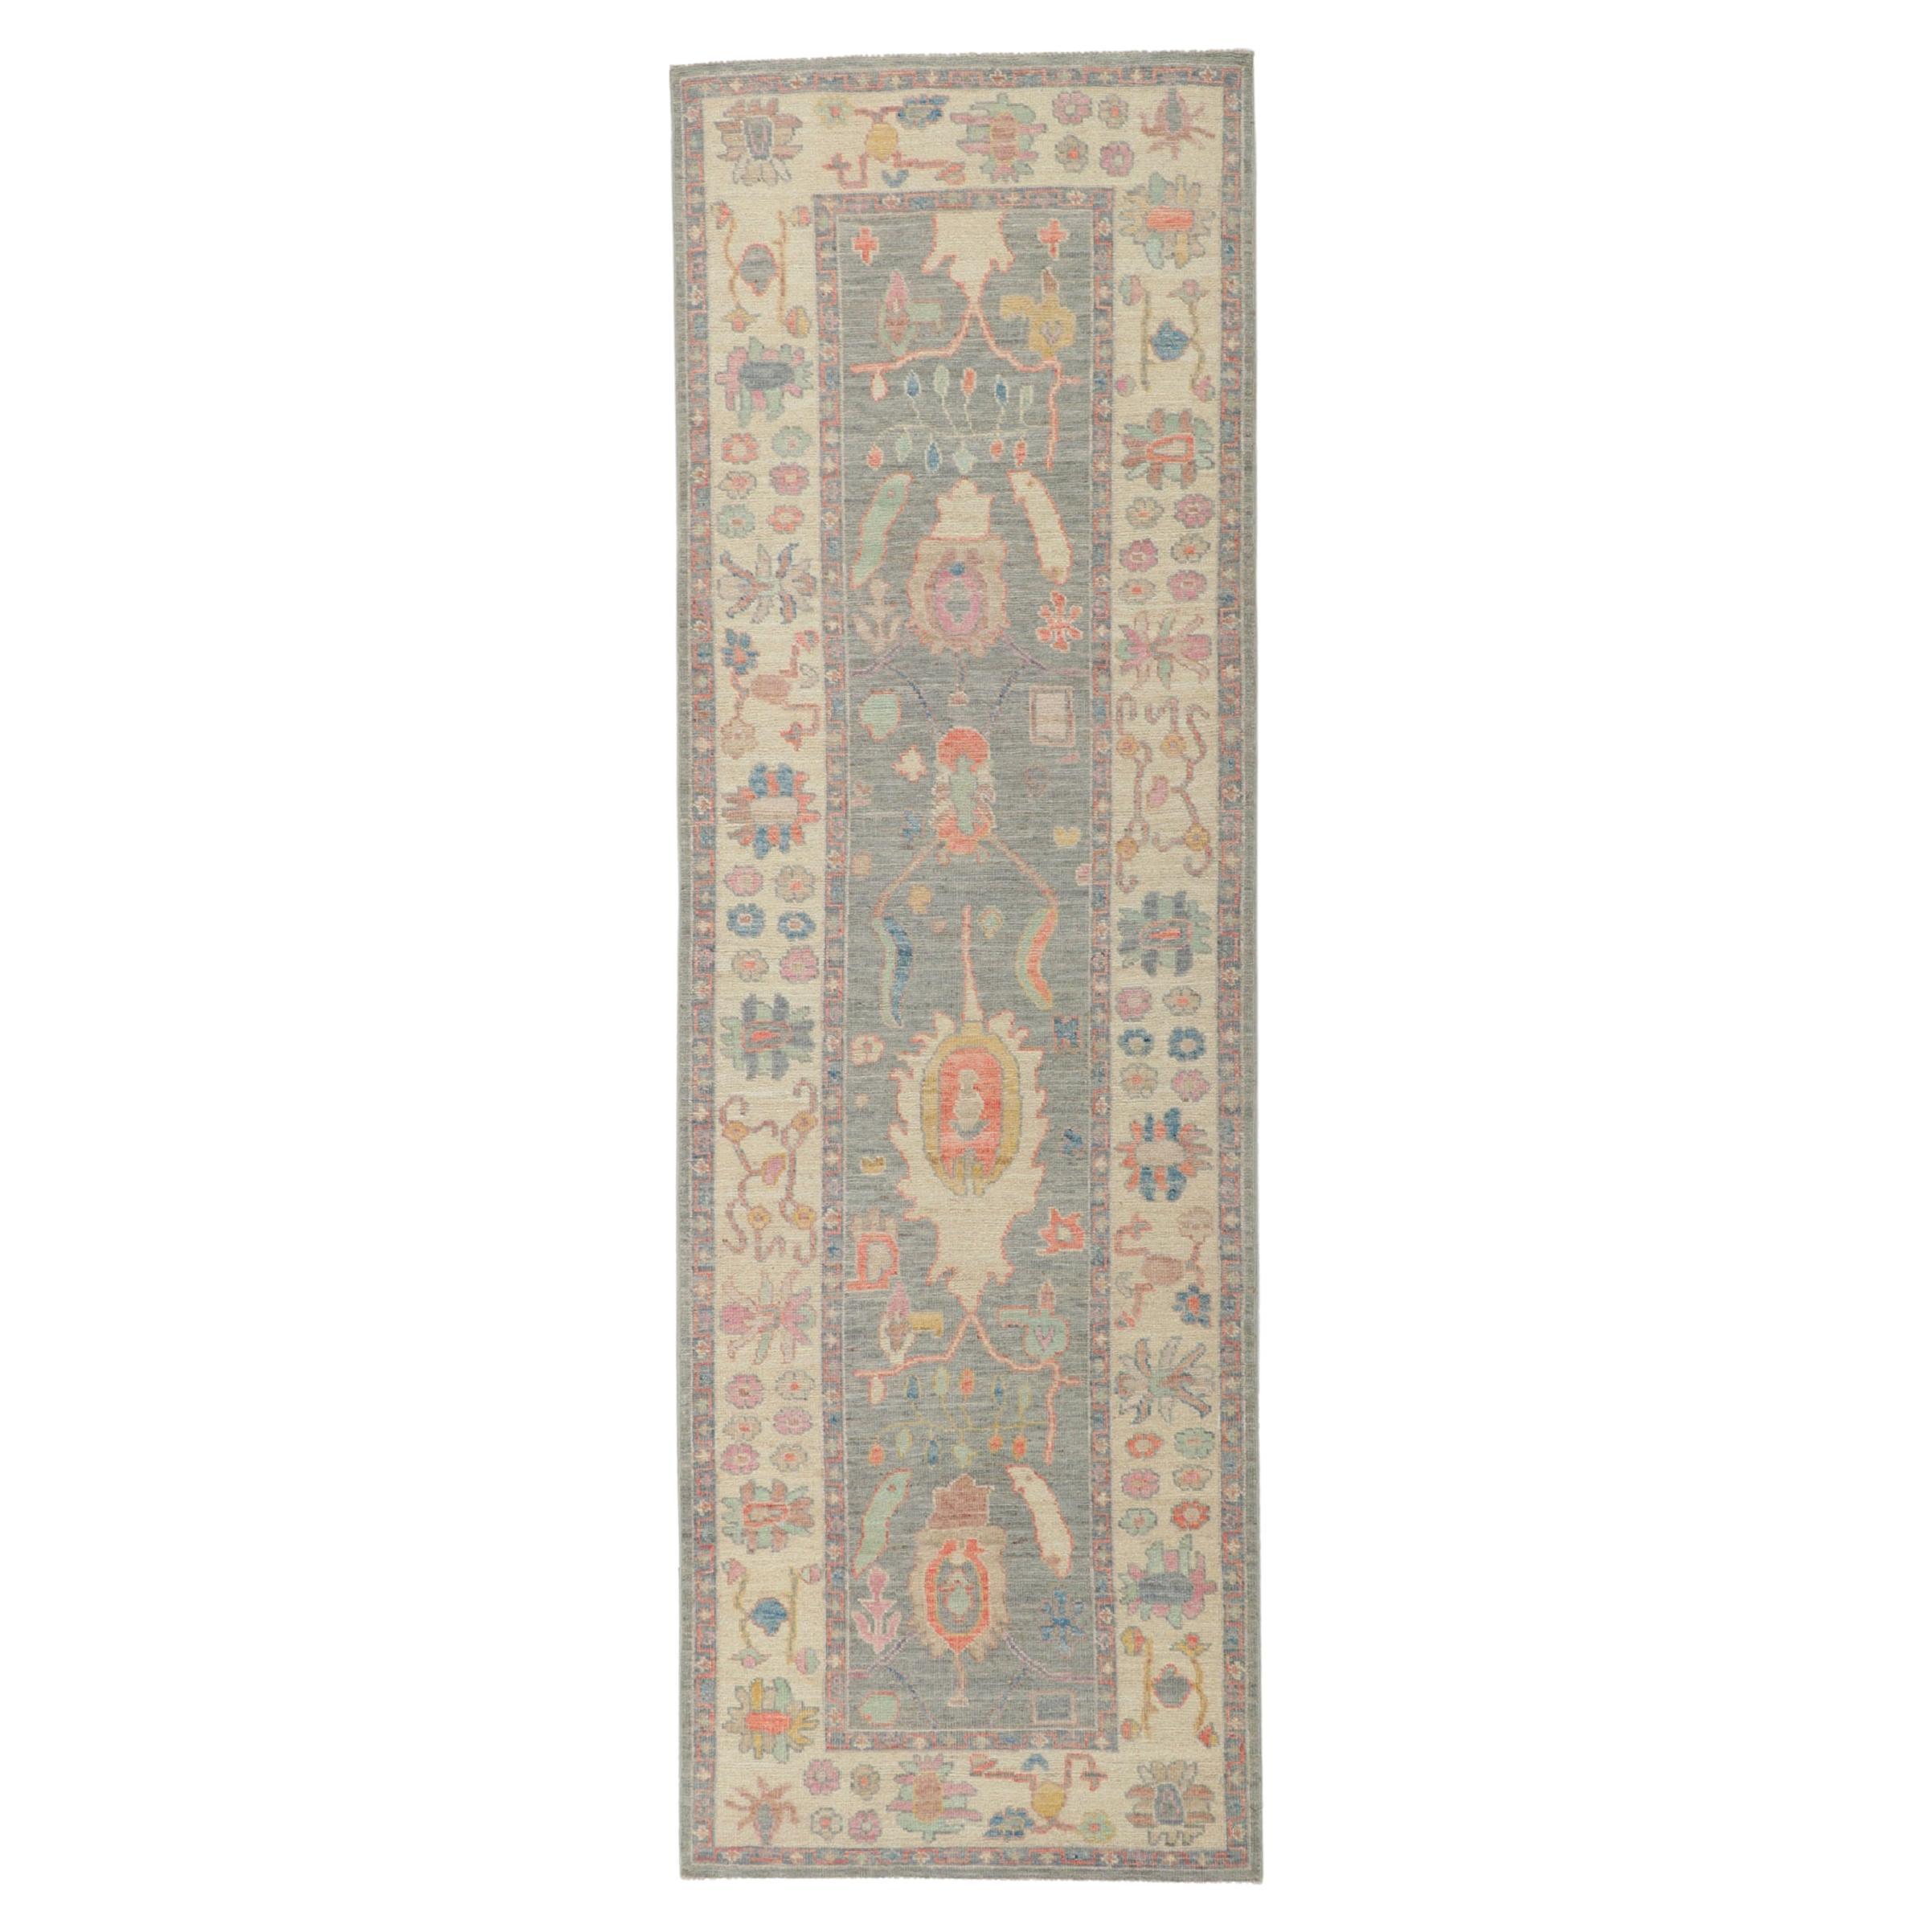 New Contemporary Oushak Runner with Soft Colors